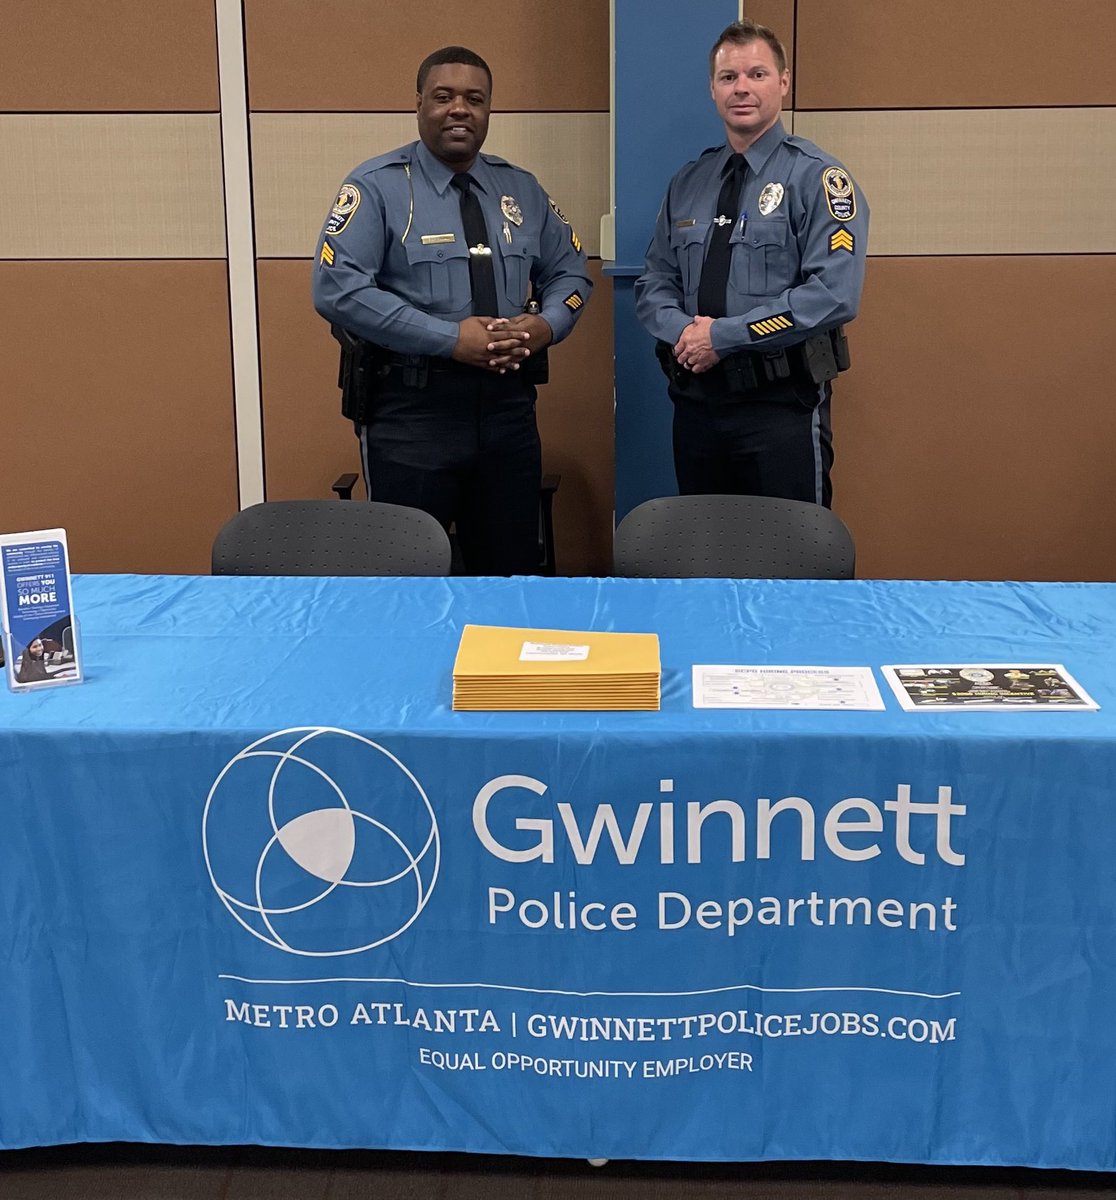 Hiring event tomorrow! Applicants will take part in streamlined hiring and can leave with a conditional job offer! Events starts at 8 AM at the Training Center in Lawrenceville. https://t.co/3GSNljVIY3

#GwinnettPD #Police #Hiring #Career https://t.co/eXpg7Ulw2H